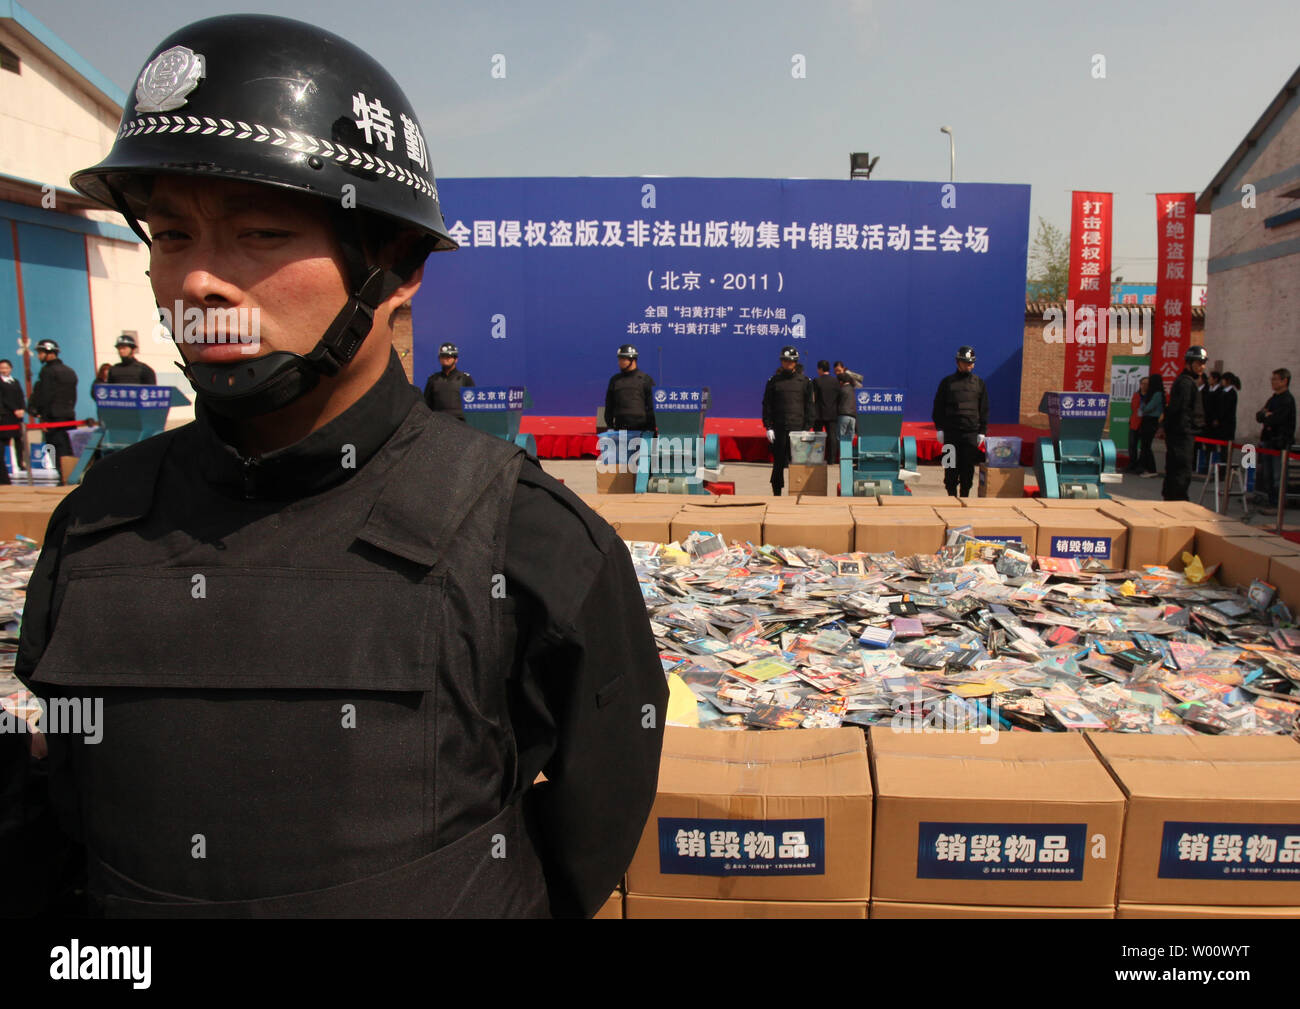 Policemen stand next to machines that will destroy the pornographic and pirated publications on display at the Beijing Warehouse of Confiscated Goods on April 22, 2011.  Thousands of pirated DVDs and CDs were destroyed in China's capital, kicking off a nationwide campaign to crack down on piracy across the country.          UPI/Stephen Shaver Stock Photo